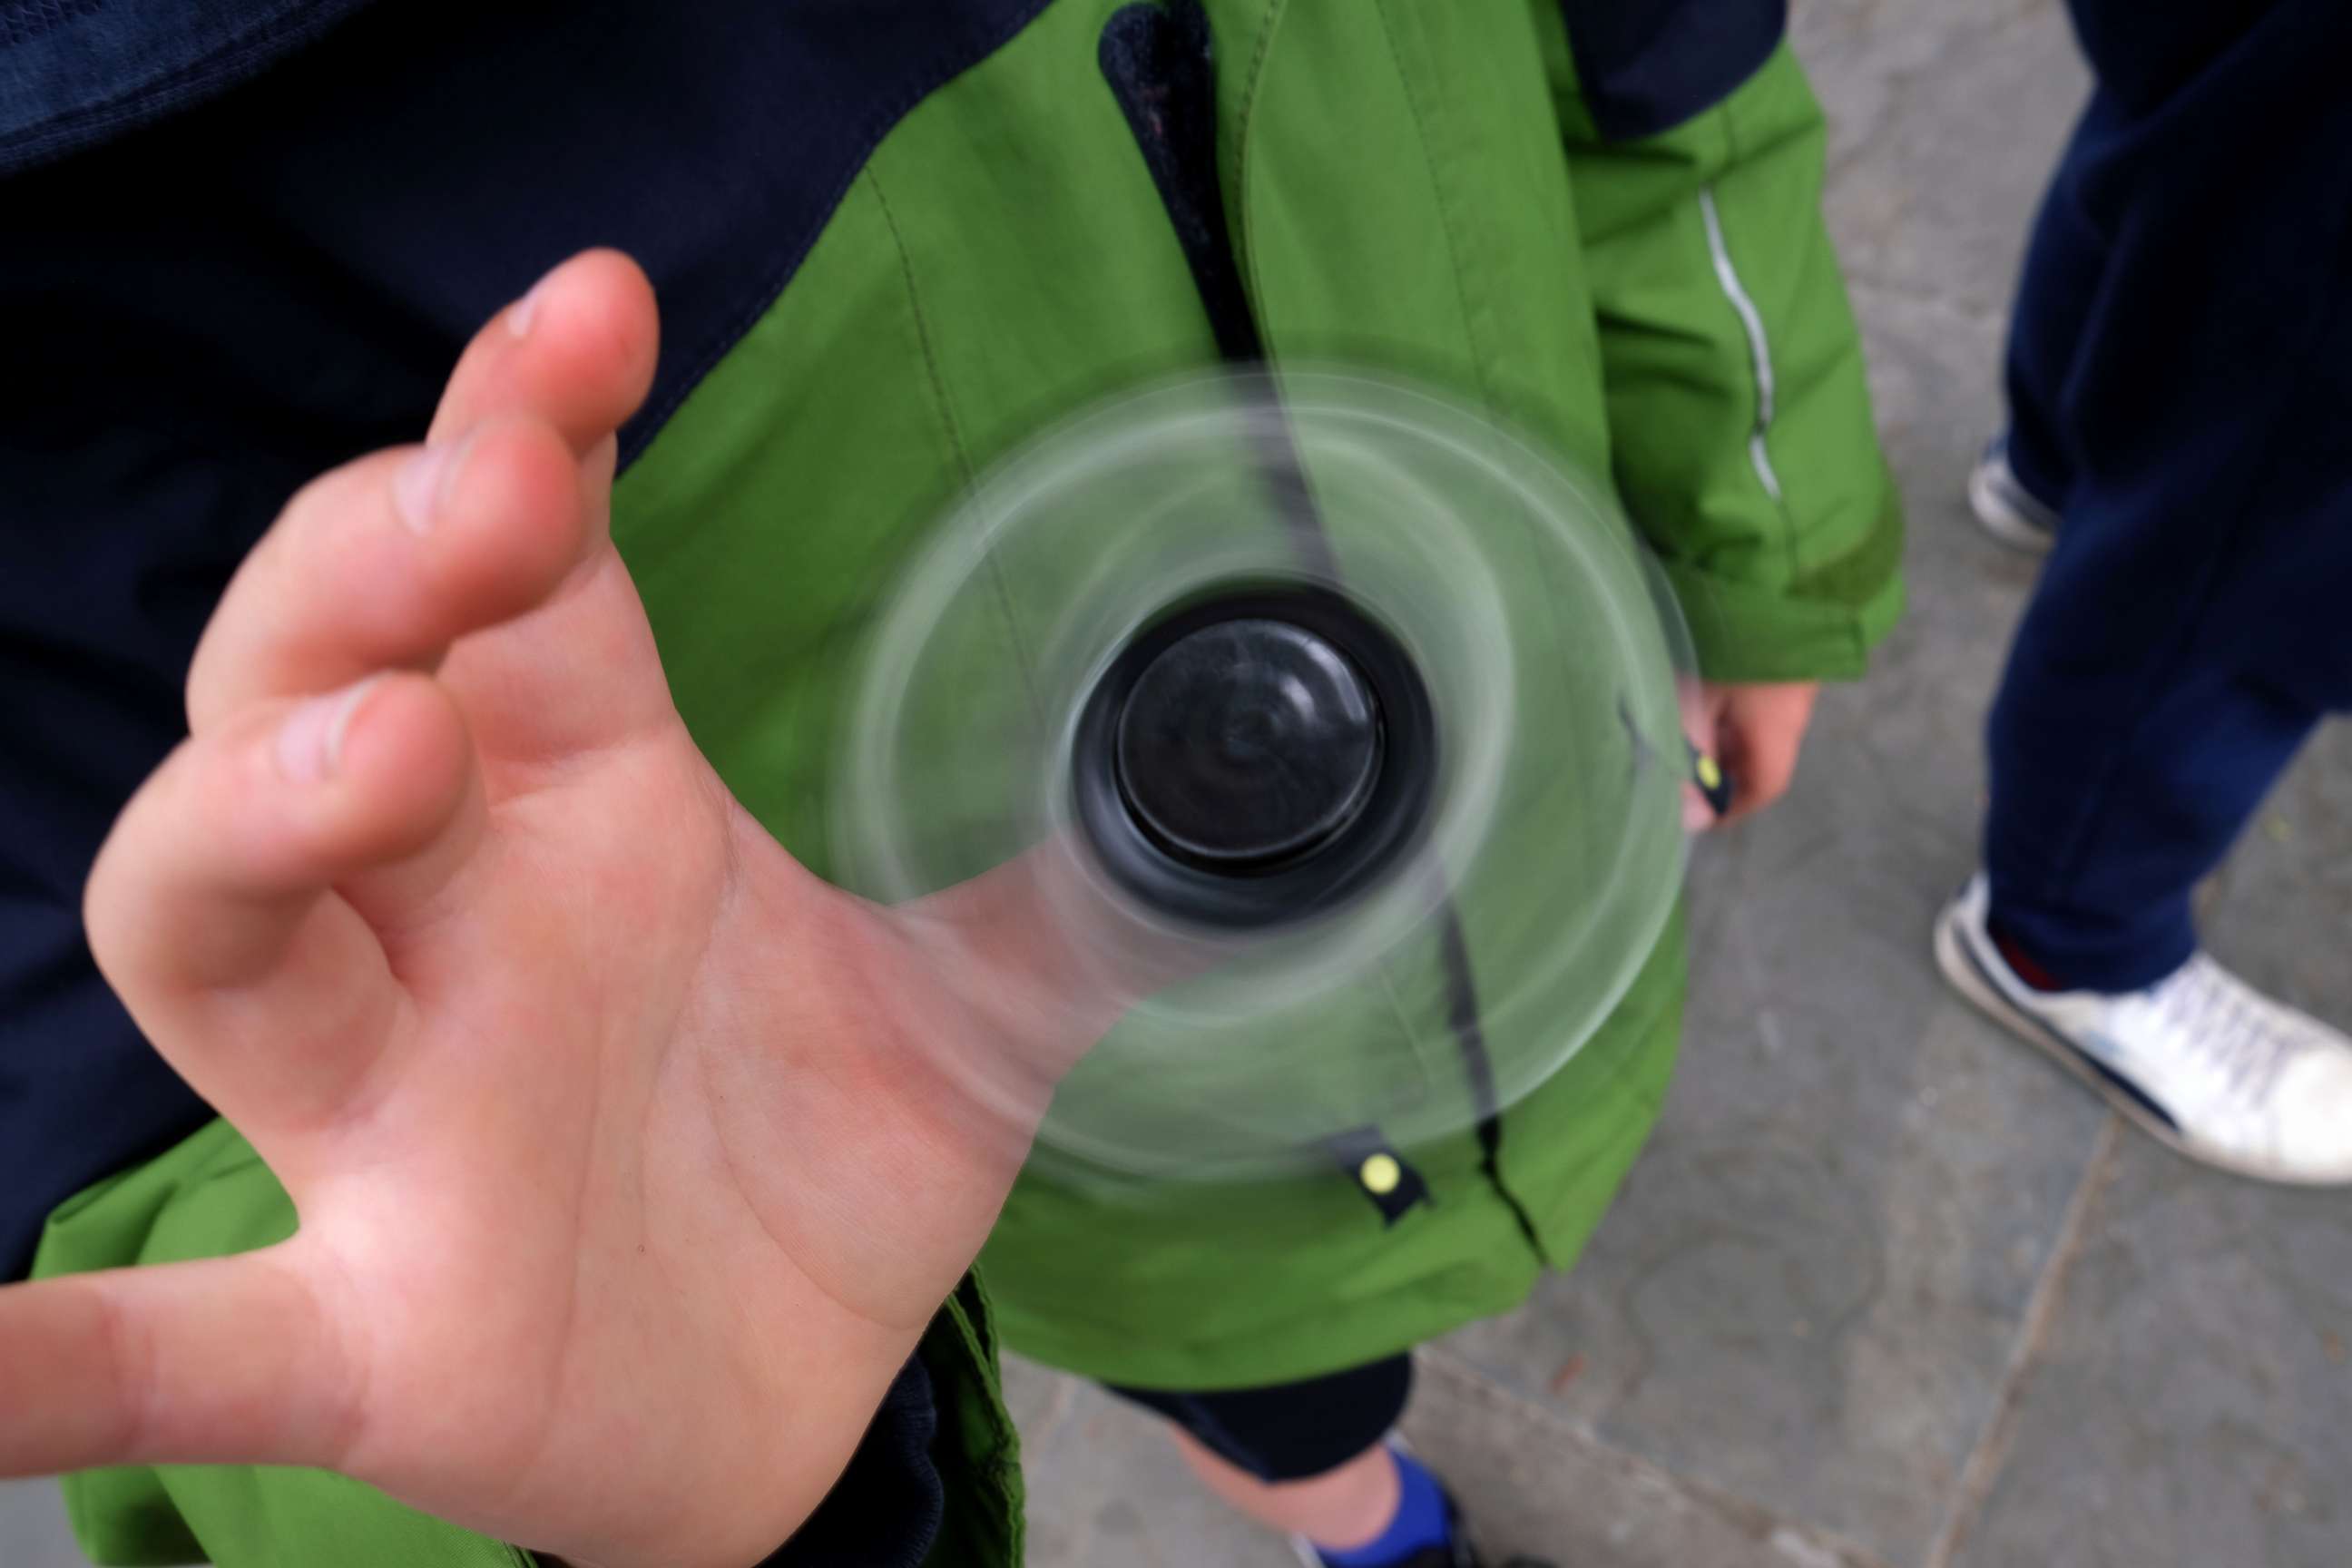 PHOTO: Eight-year-old Tom Wuestenberg plays with a fidget spinner in a park in New York city, May 23, 2017.